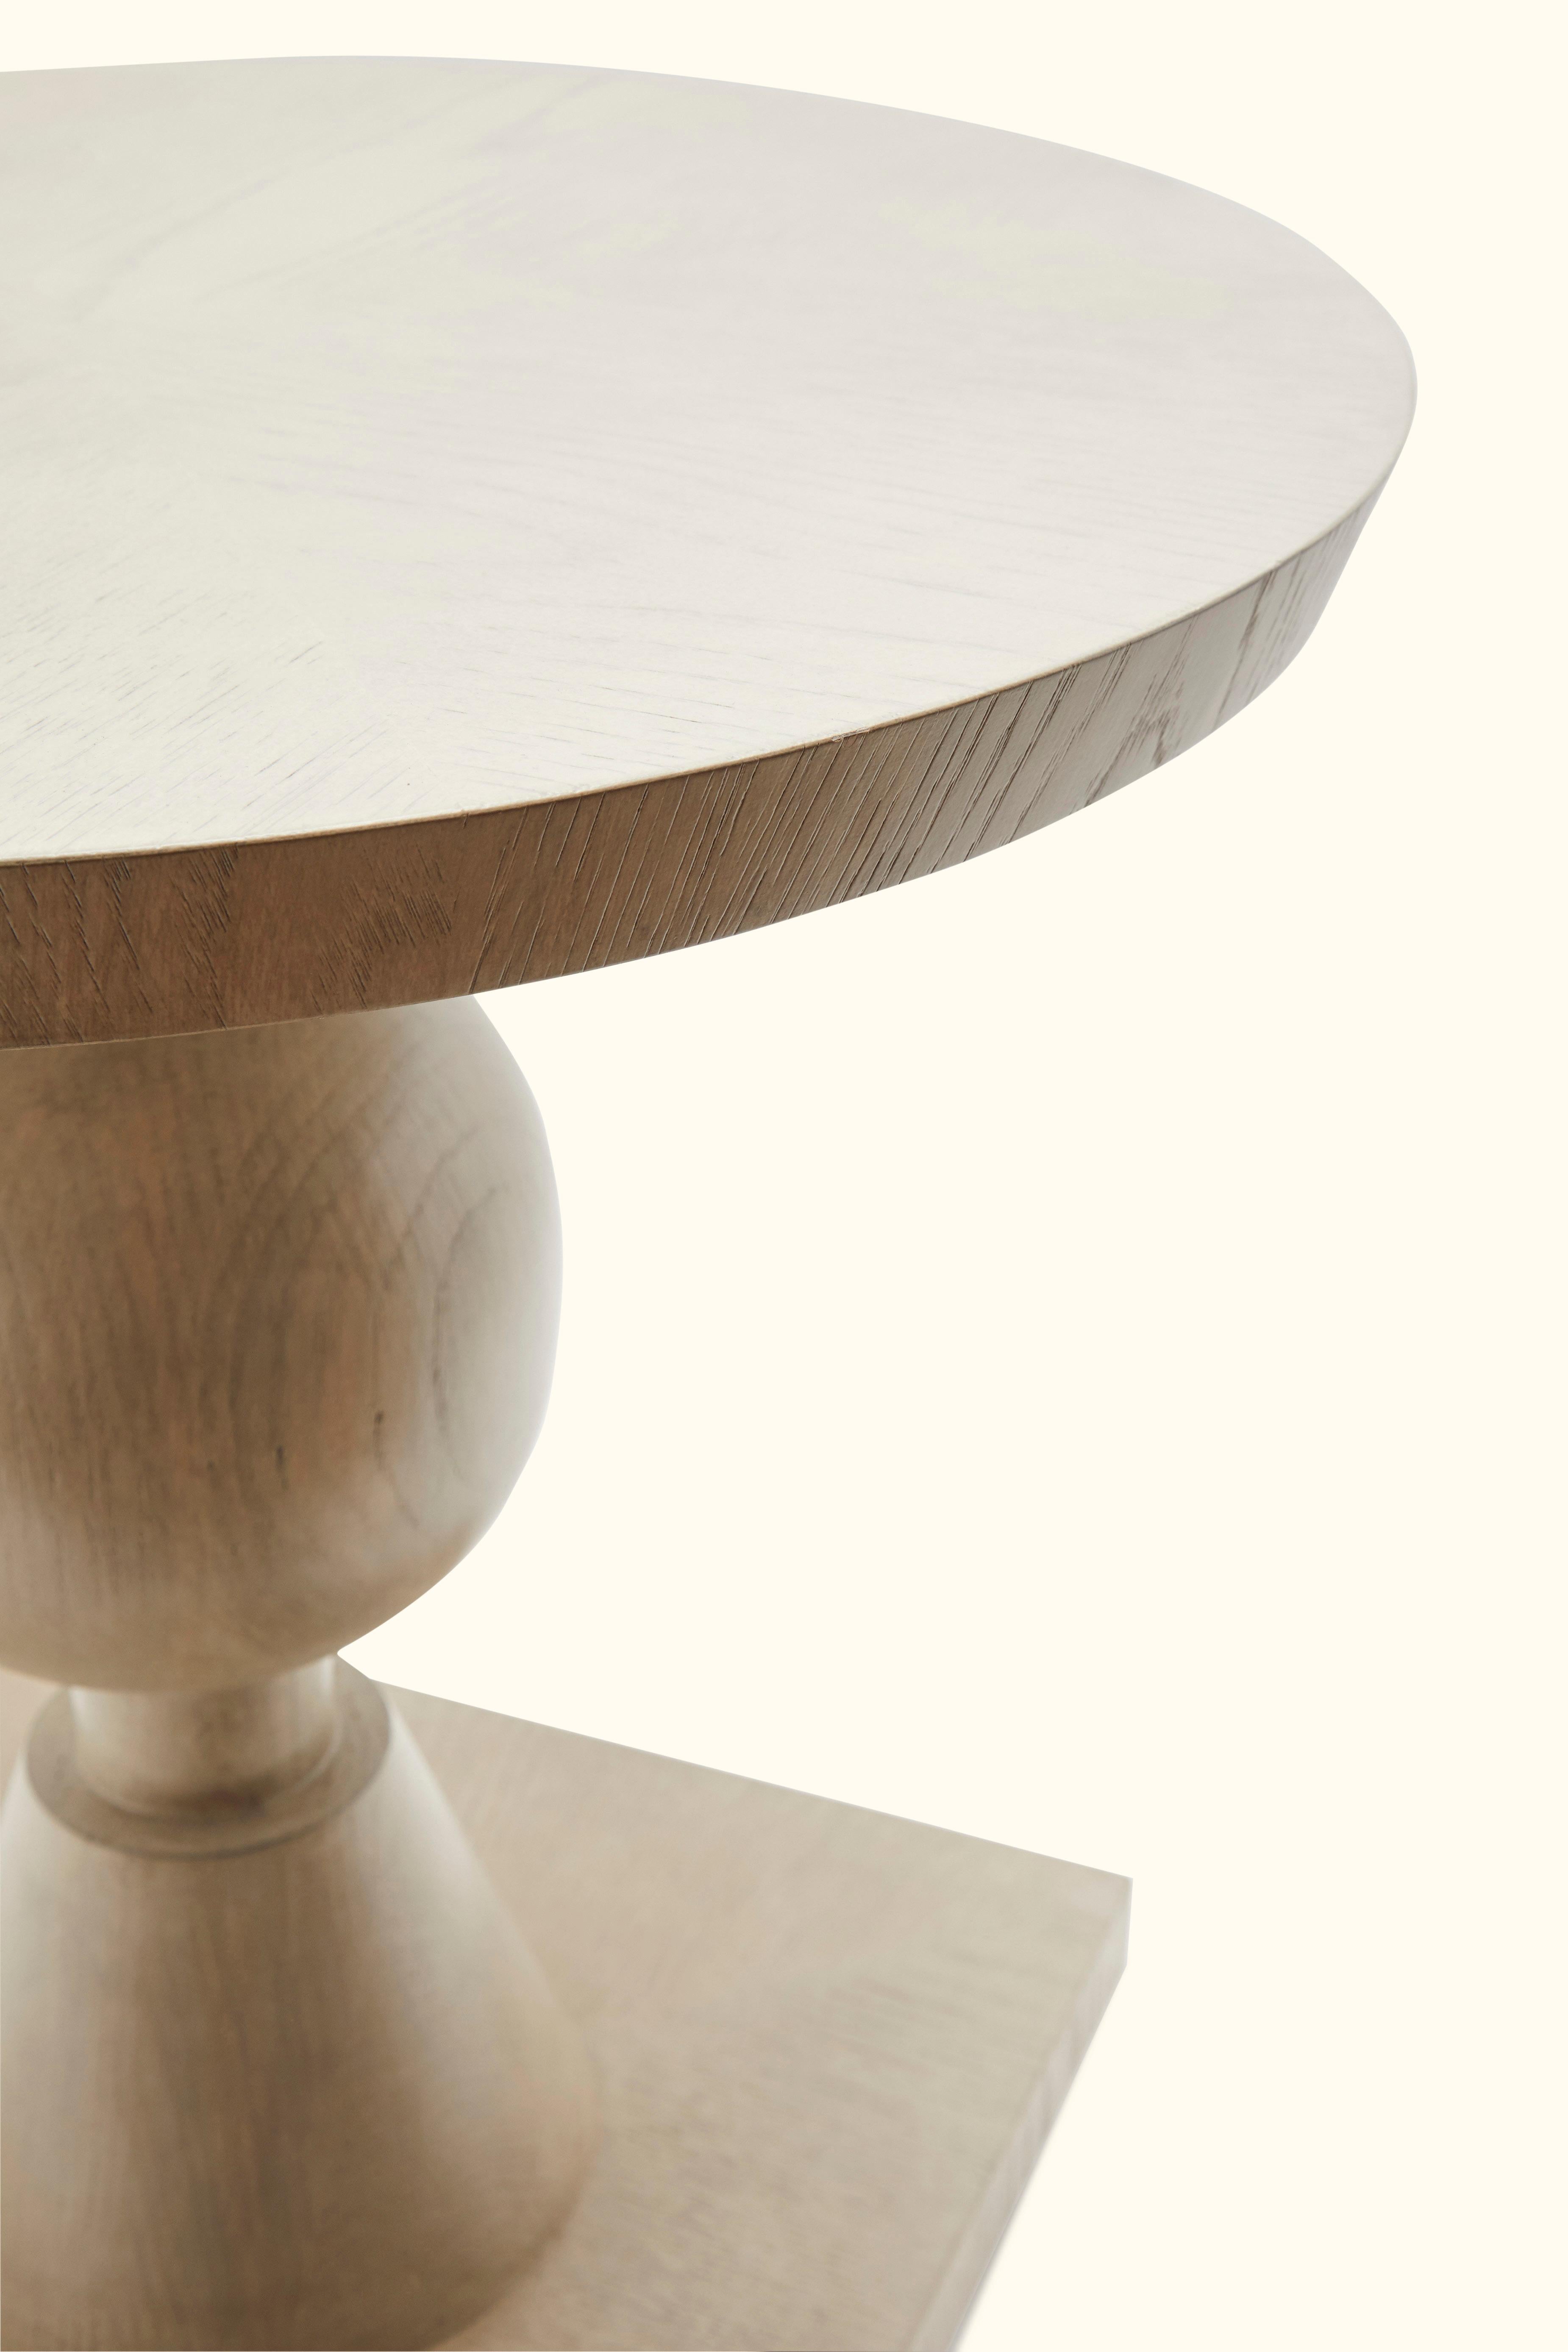 American White Washed Oak Sur Table by Lawson-Fenning